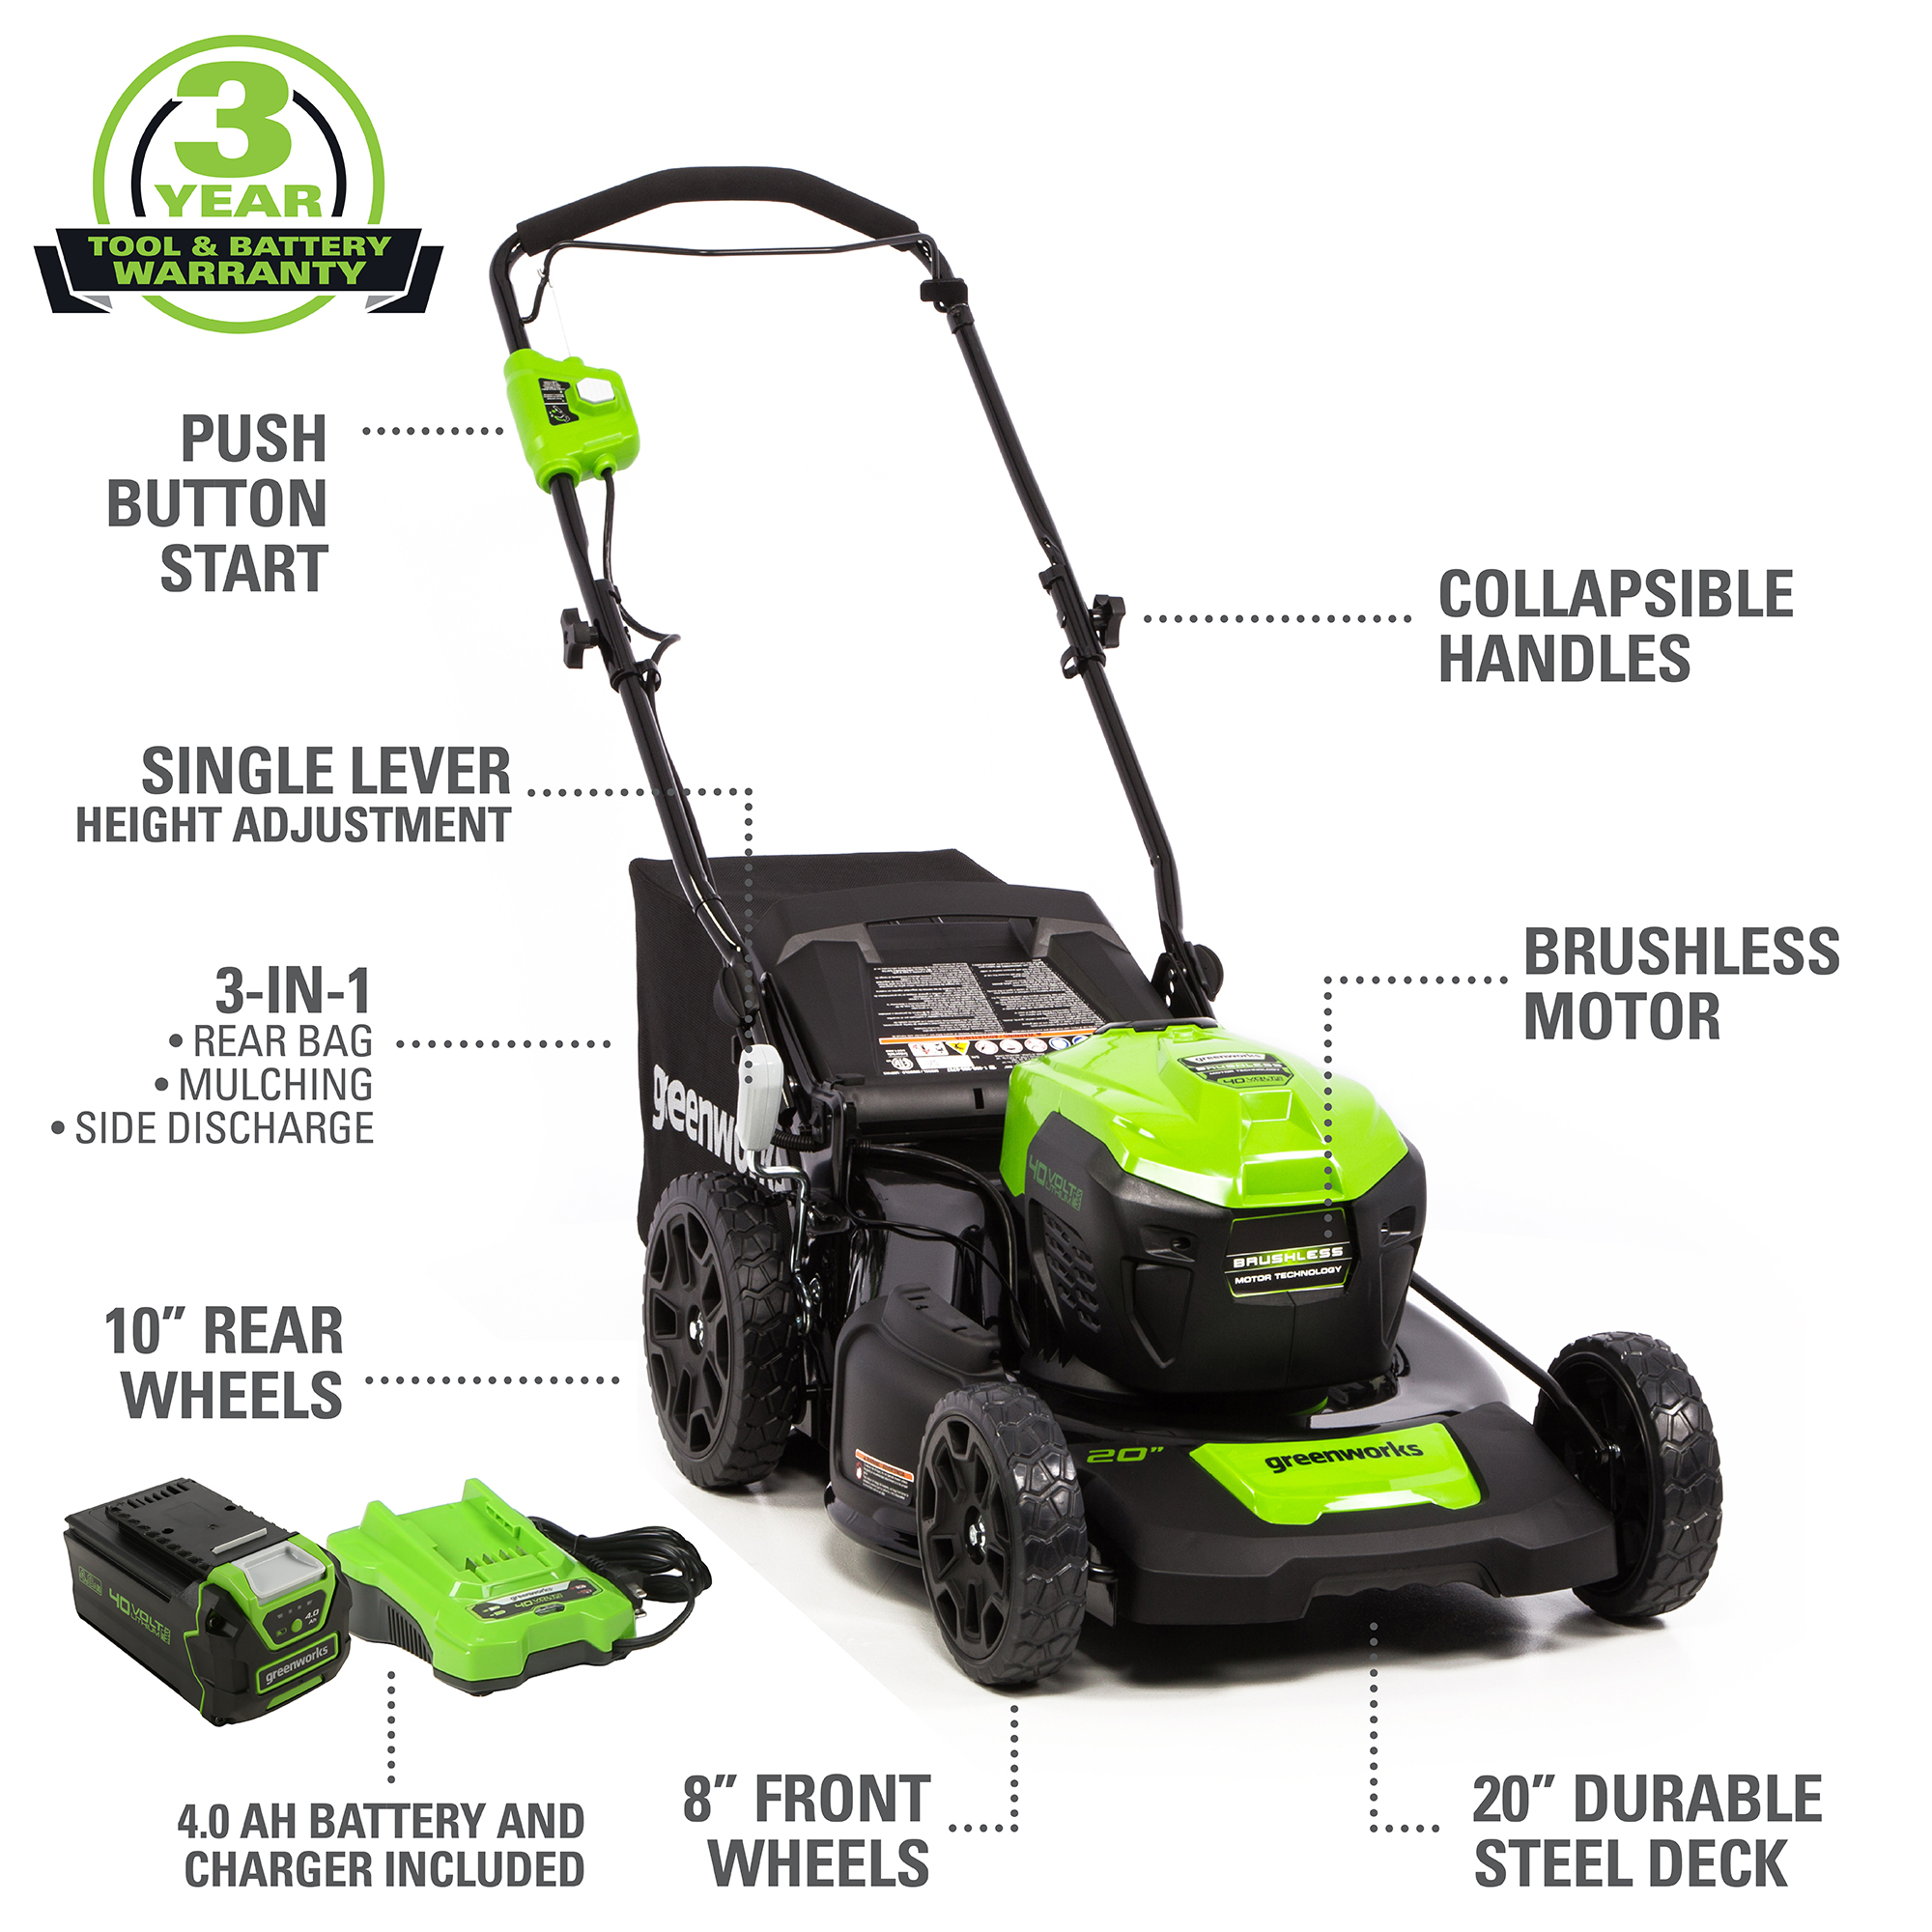 Greenworks 40V 20" Brushless Push Lawn Mower with 4.0 Ah Battery & Quick Charger 2516302VT - image 3 of 13